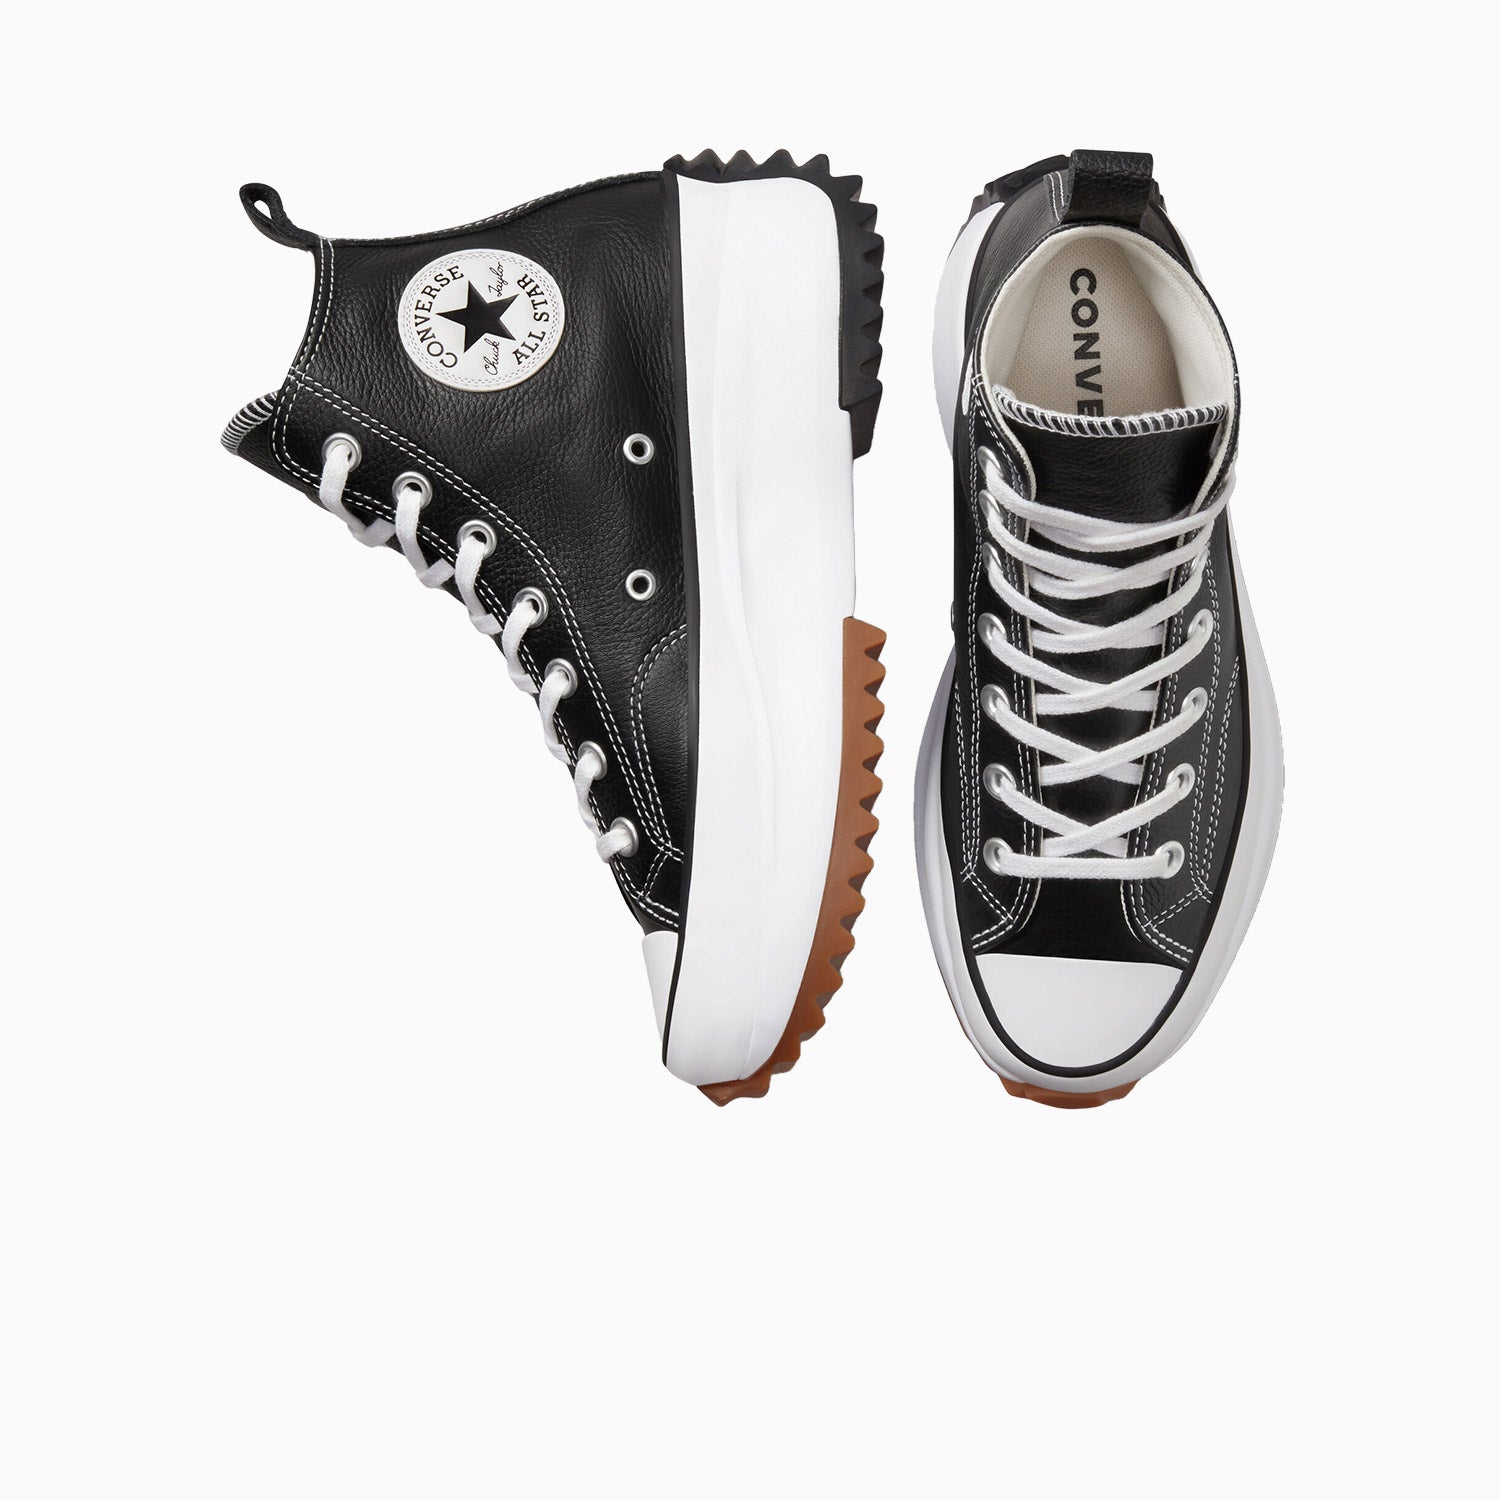 converse-run-star-hike-platform-foundational-leather-shoes-a04292c